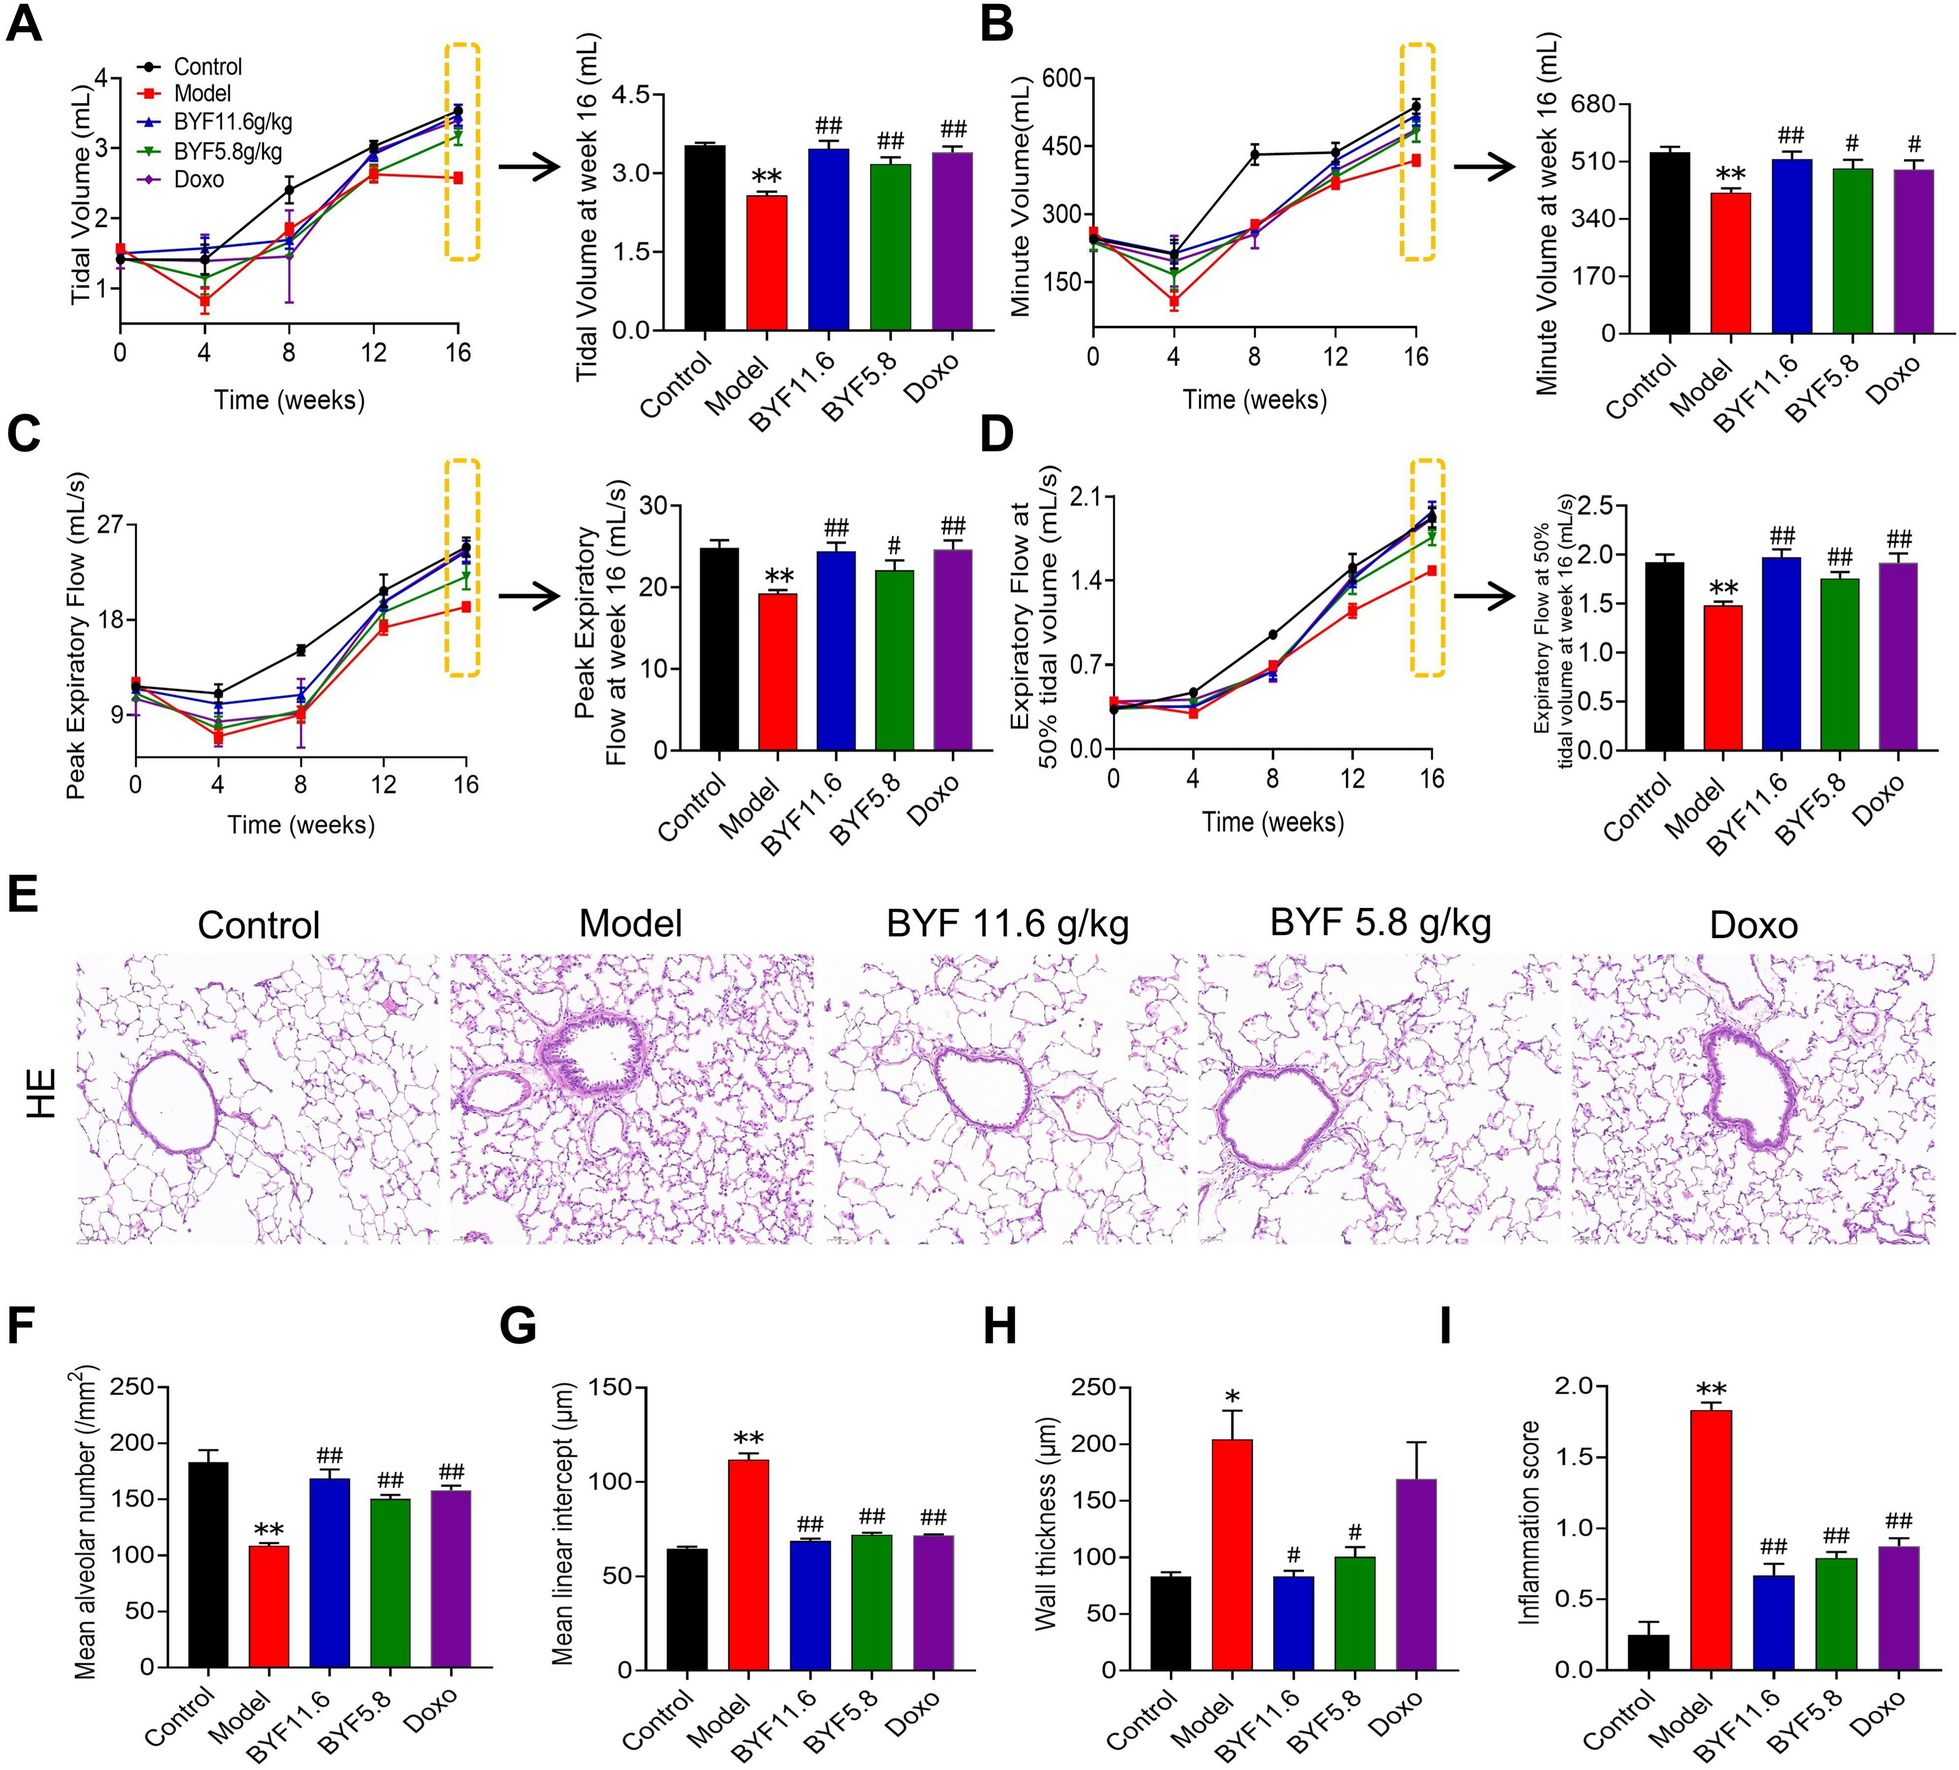 Bufei Yishen formula protects the airway epithelial barrier and ameliorates COPD by enhancing autophagy through the Sirt1/AMPK/Foxo3 signaling pathway